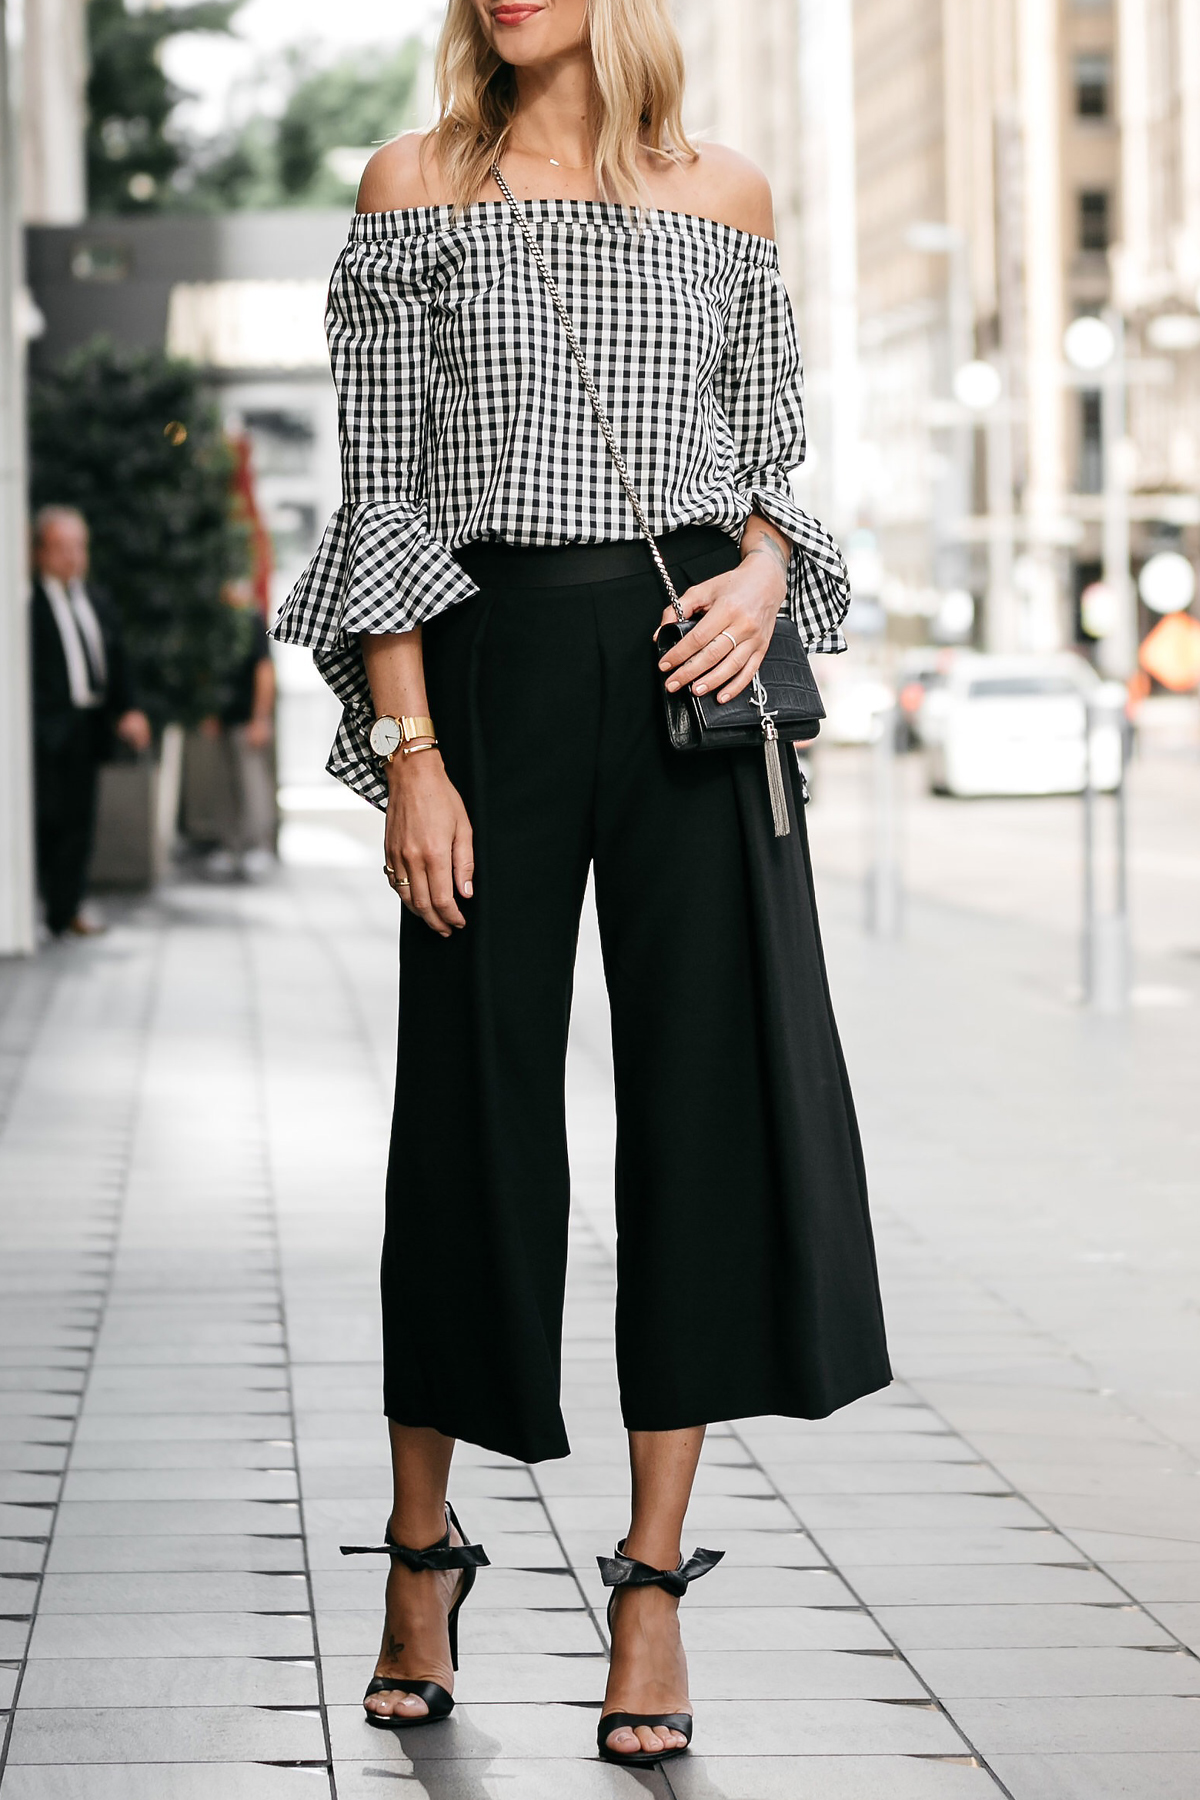 Blonde woman wearing nordstrom gingham off-the-shoulder top topshop black culottes outfit black bow heels ysl crossbody street style dallas blogger fashion blogger